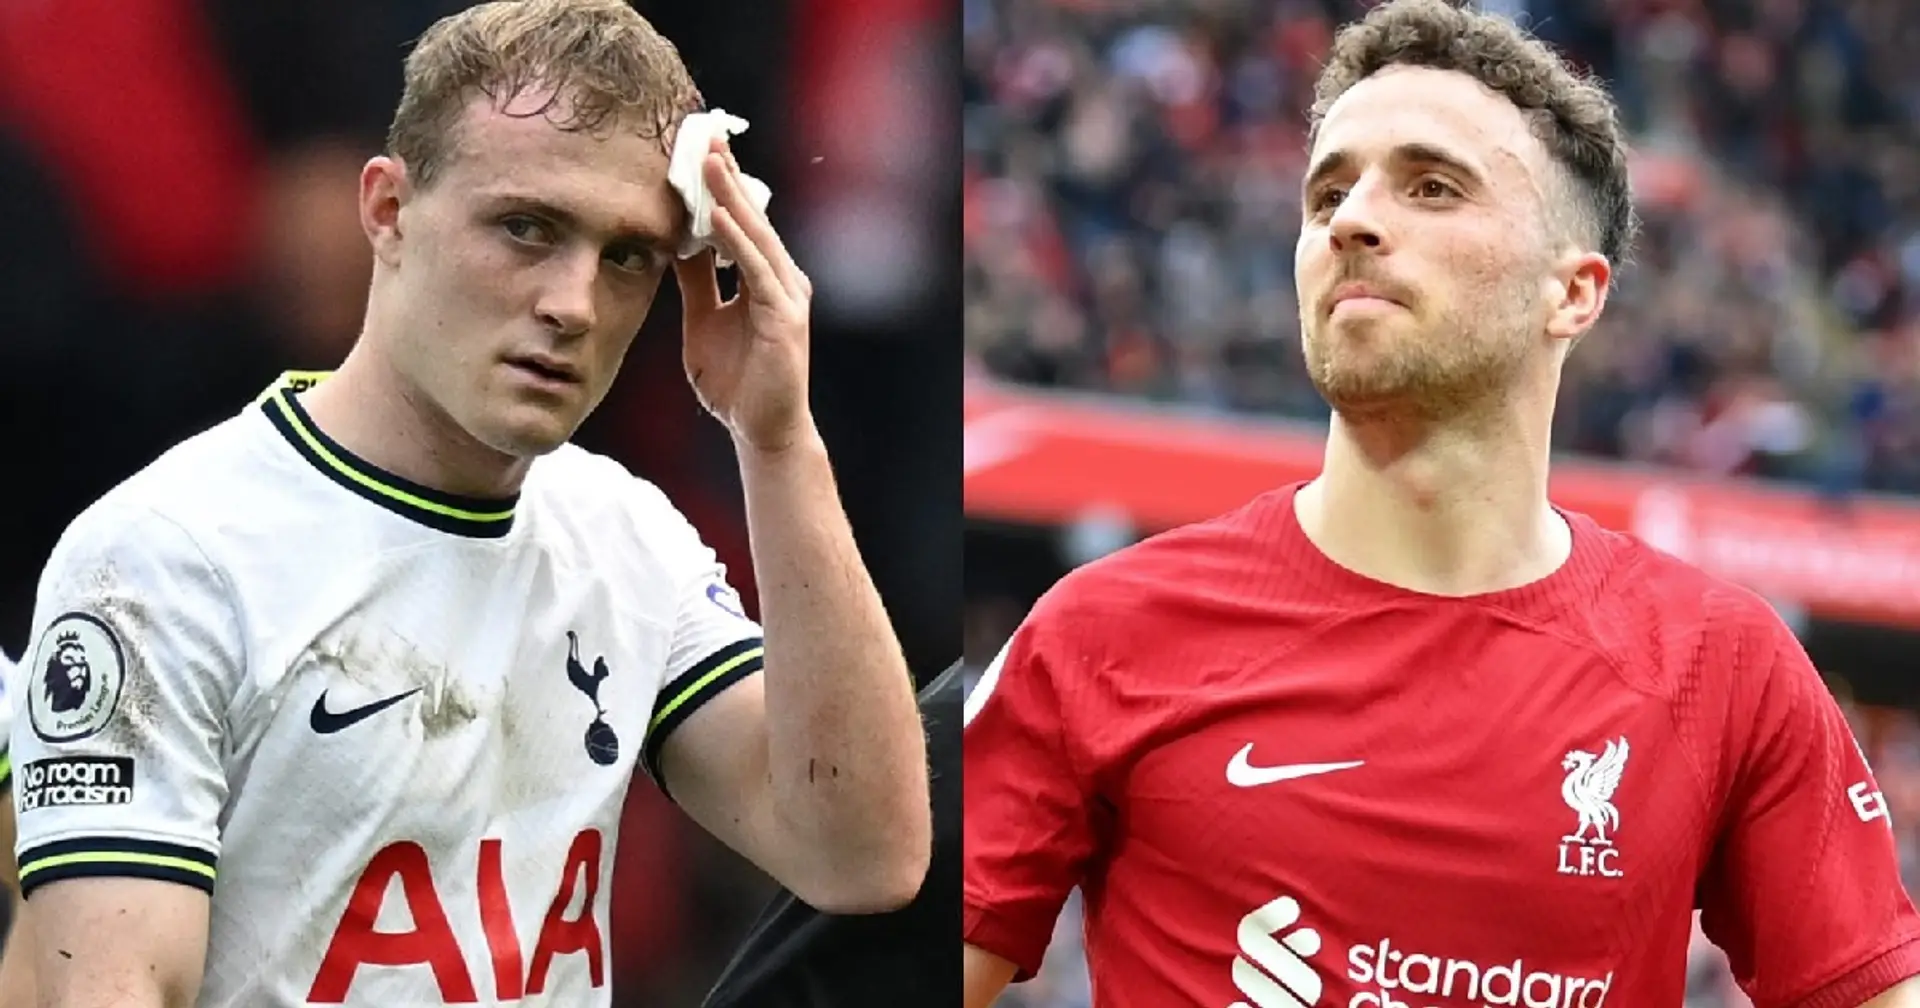 'Not a great tackle': Diogo Jota reveals what he told Skipp after kicking him in the head